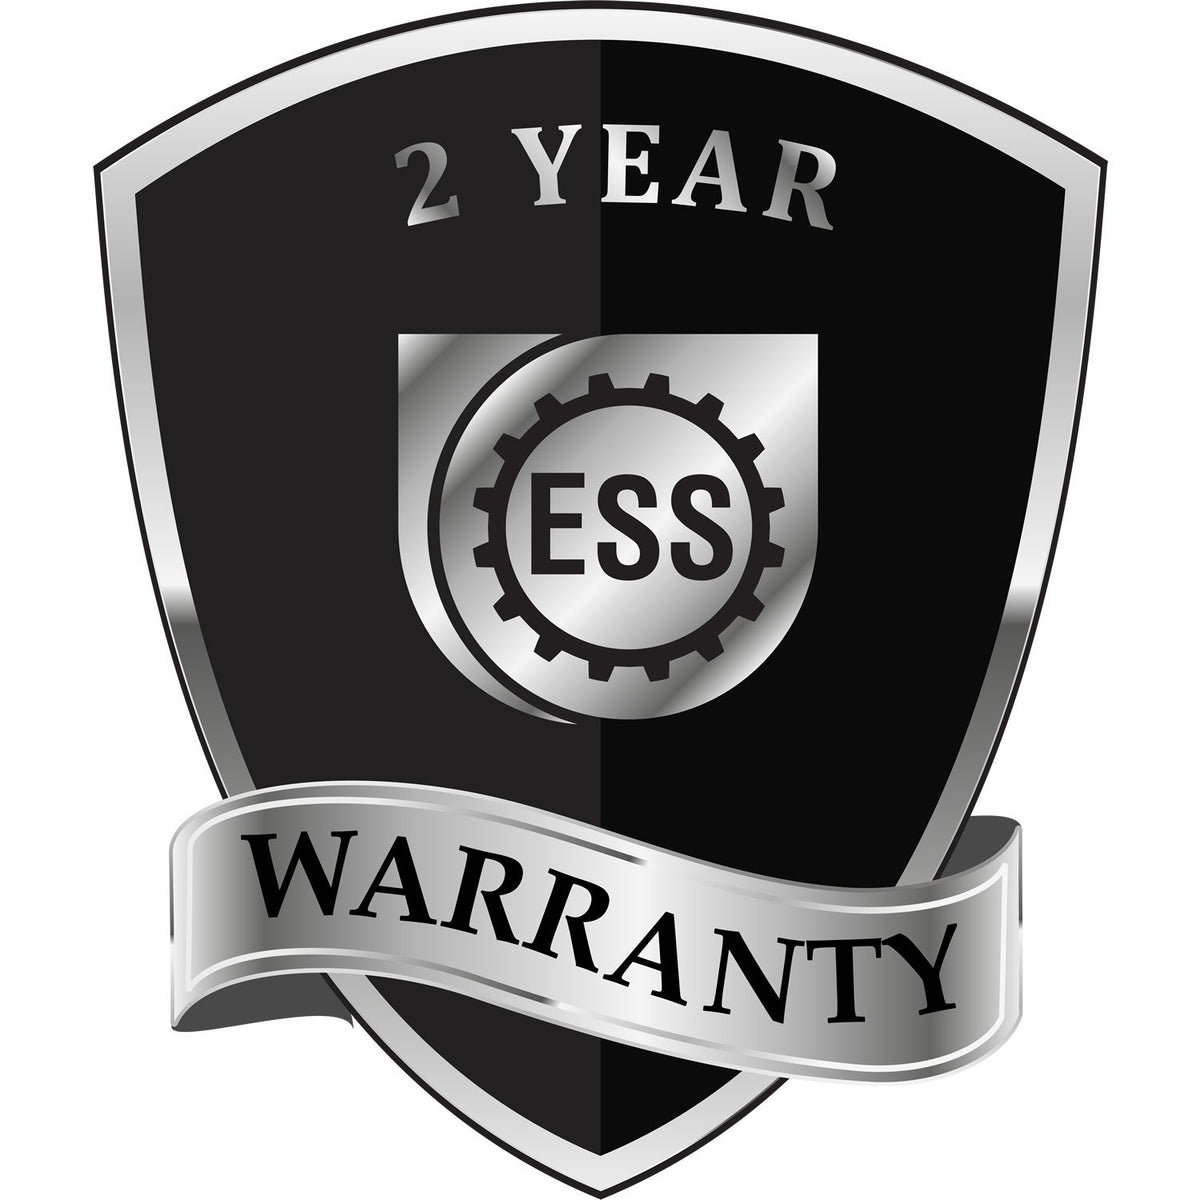 A black and silver badge or emblem showing warranty information for the Hybrid Tennessee Architect Seal